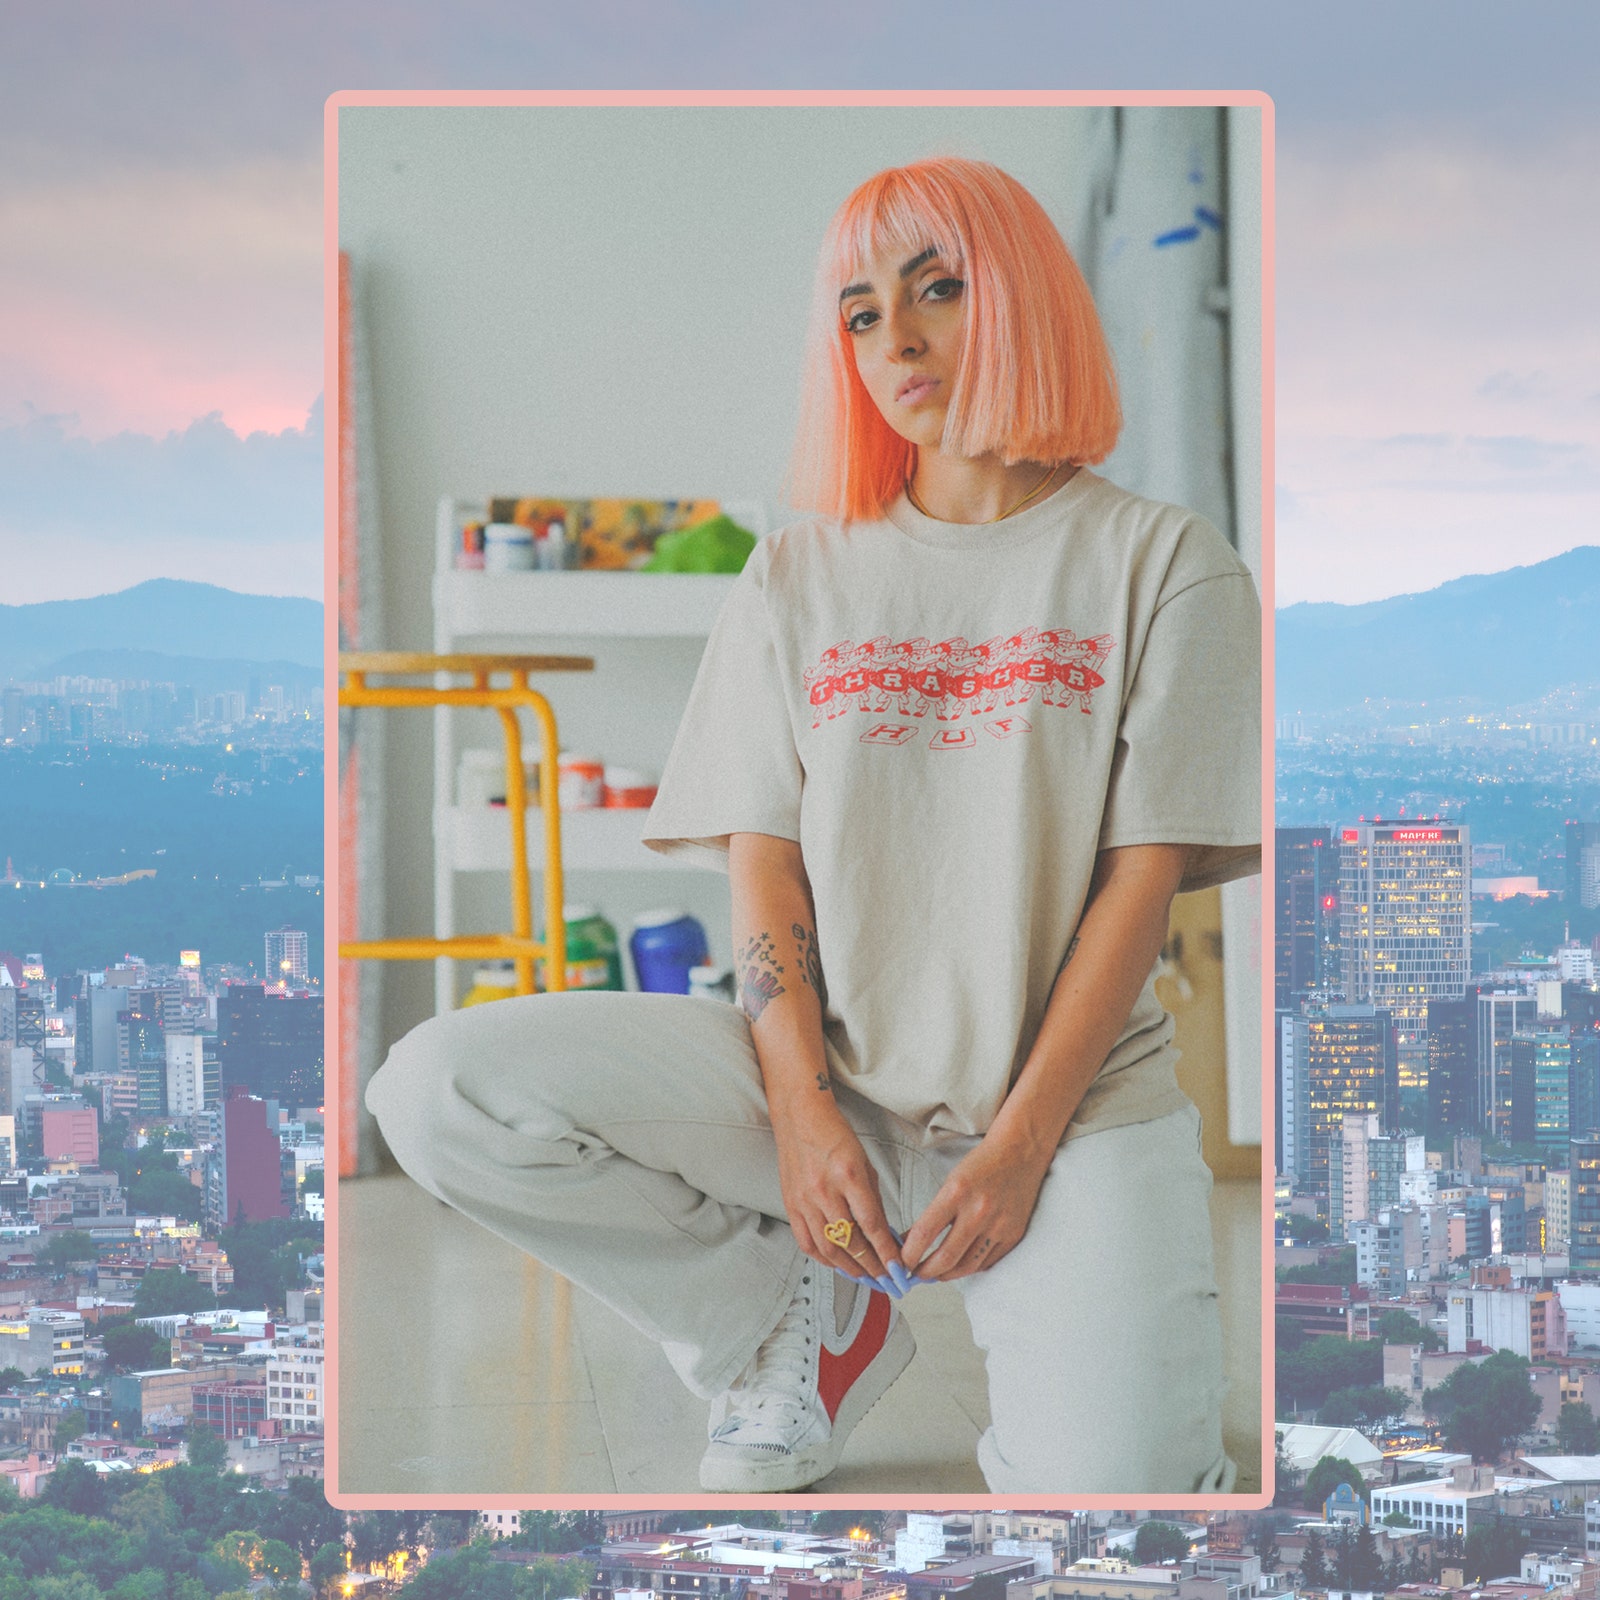 A person with pink hair on a background of a city